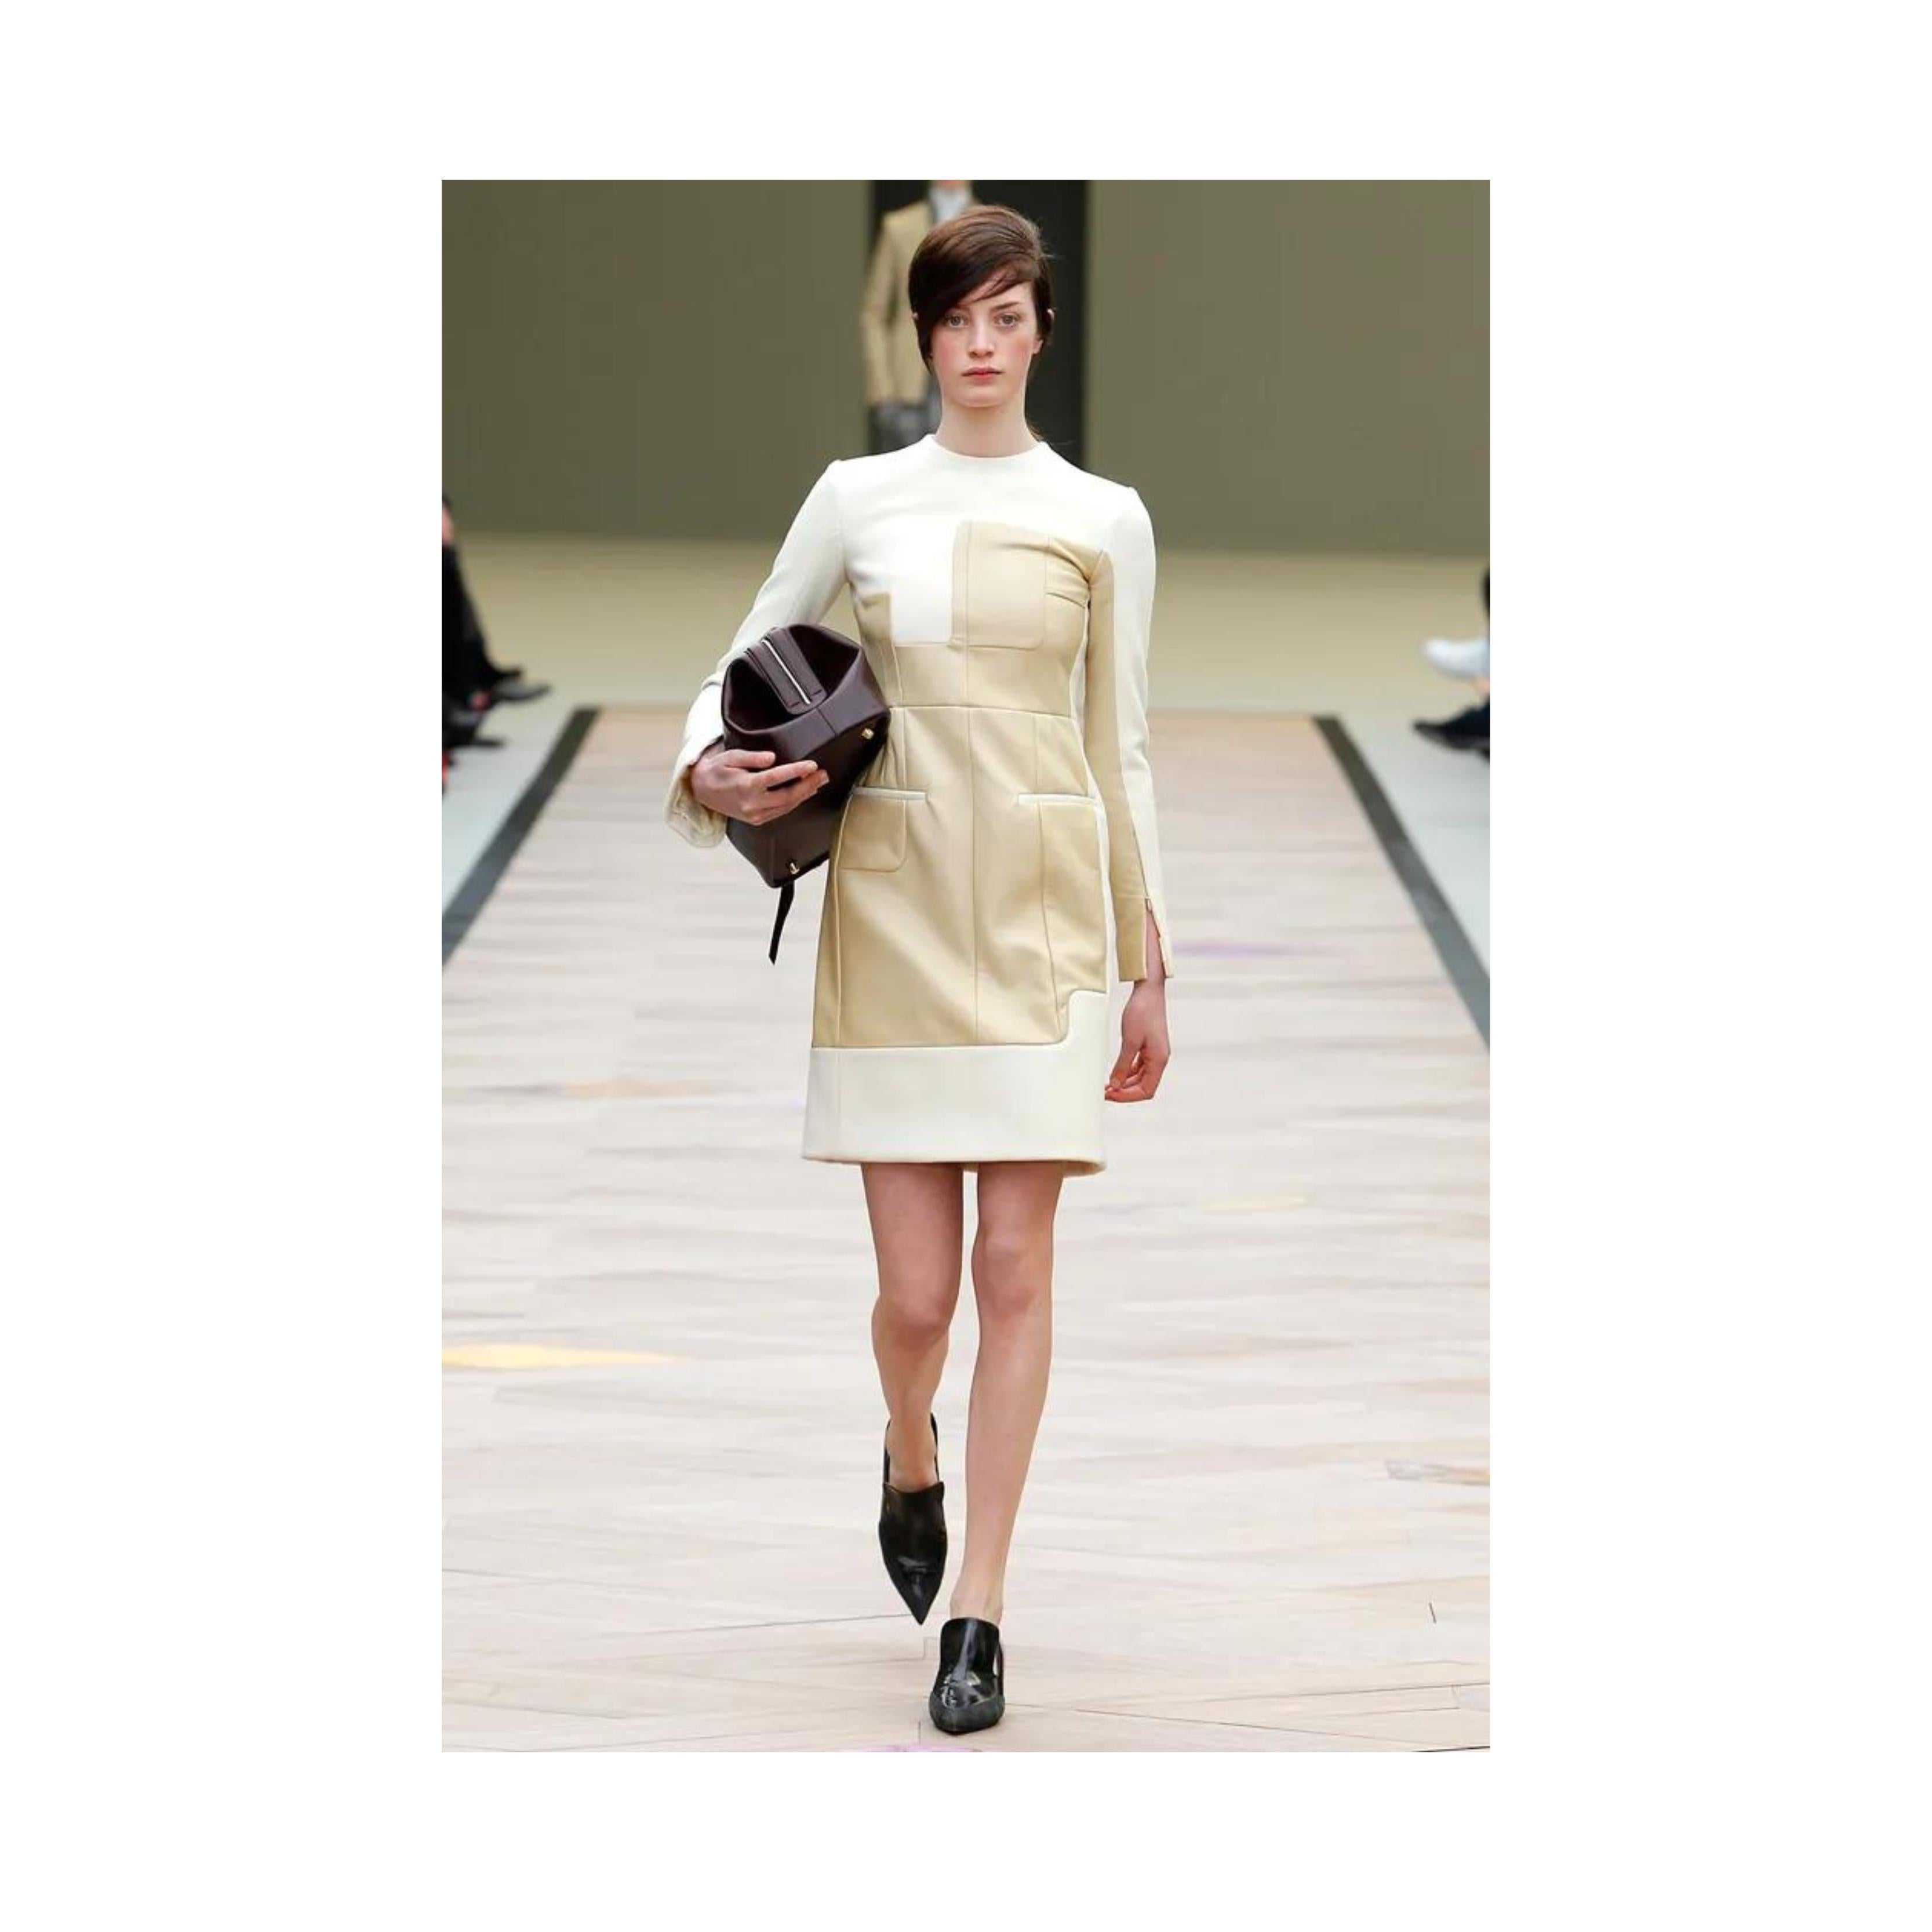 Introducing the Celine dress by Phoebe Philo, crafted from a mix of wool and leather for maximum texture contrast. As seen on the Fall 2011 Runway Collection dress in a different shade, this dress features a brown woven wool shift dress, completed